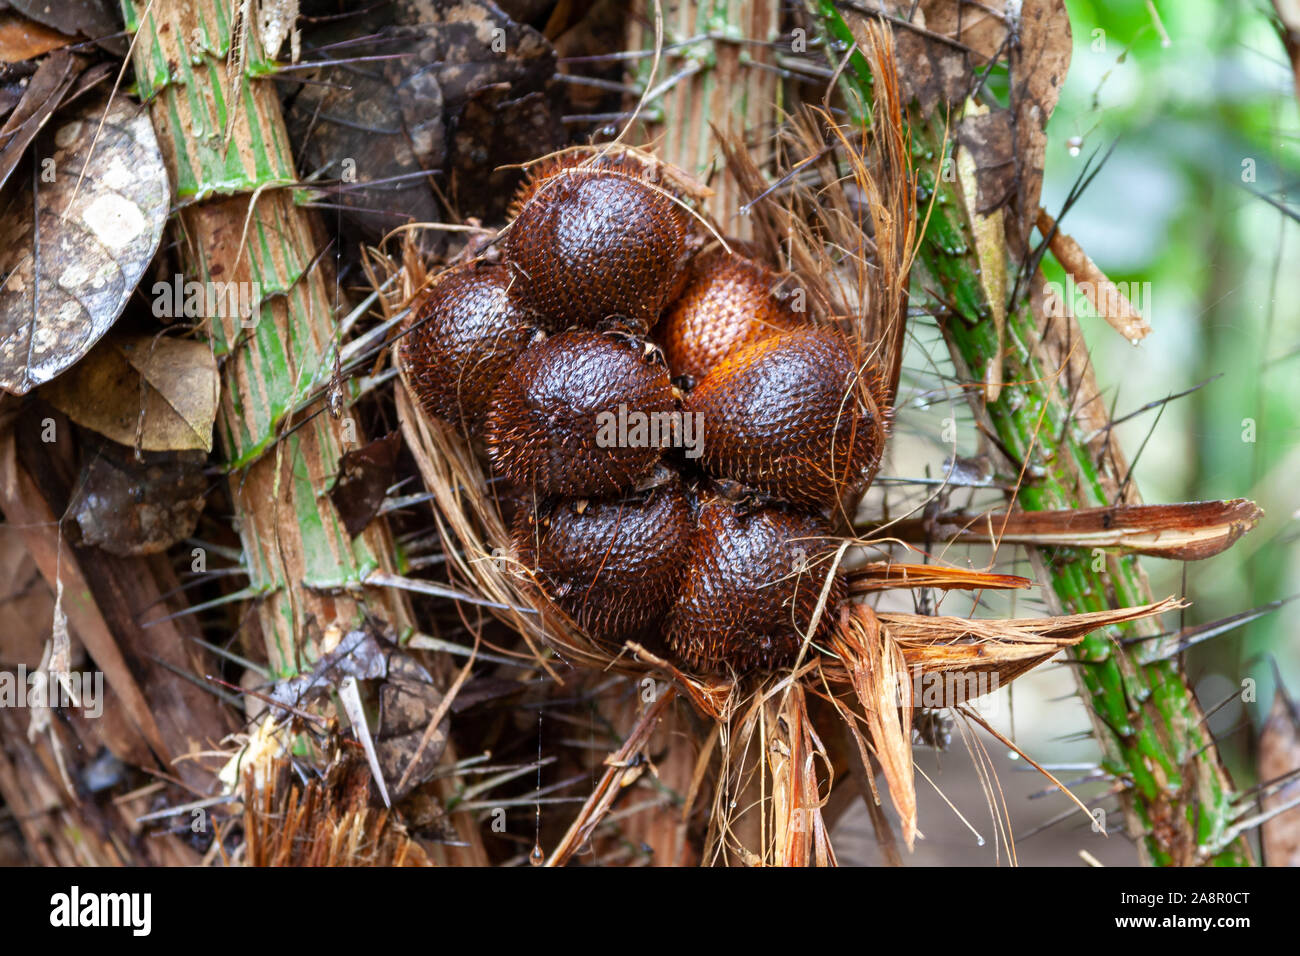 Salak Snake fruit sitting in the tree ready to be plugged. Snake fruit is a delicacy and well know in South East Asia, especially Indonesia. Stock Photo